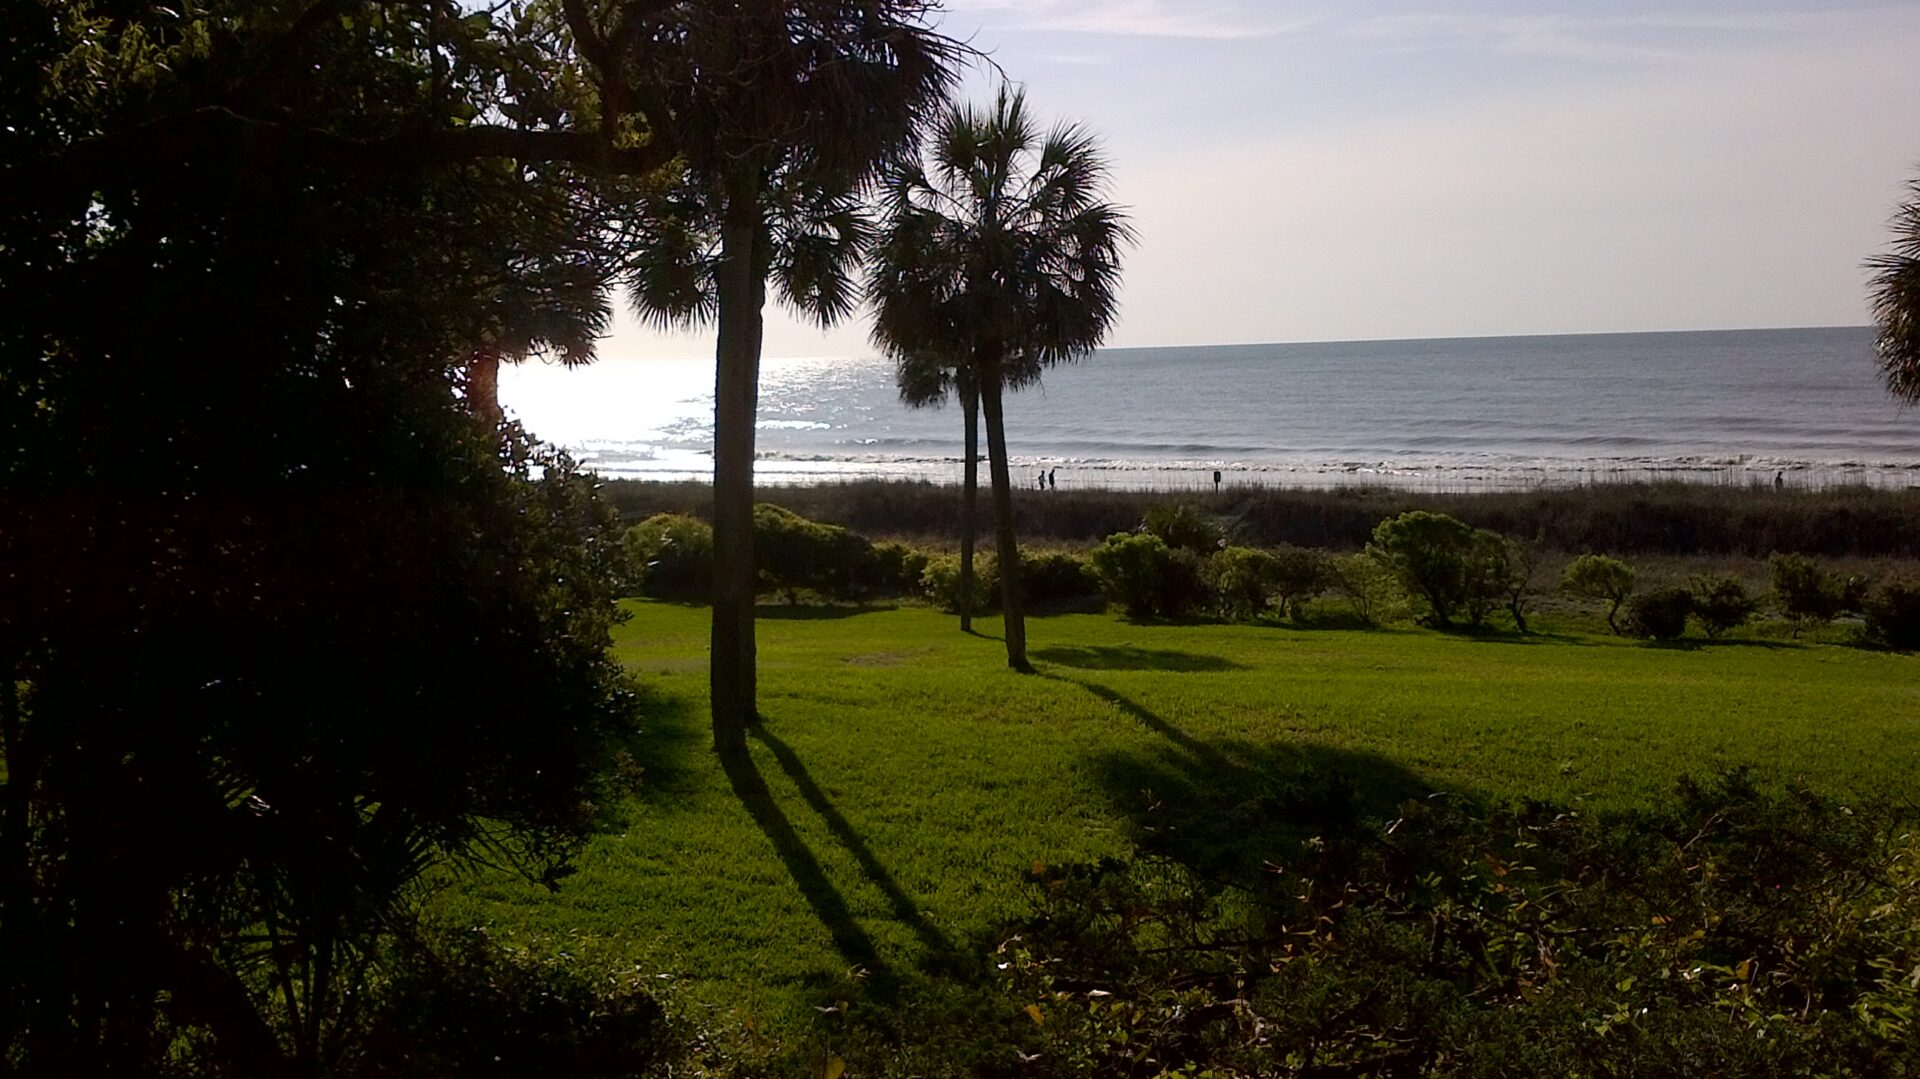 A view of the ocean from behind some trees.